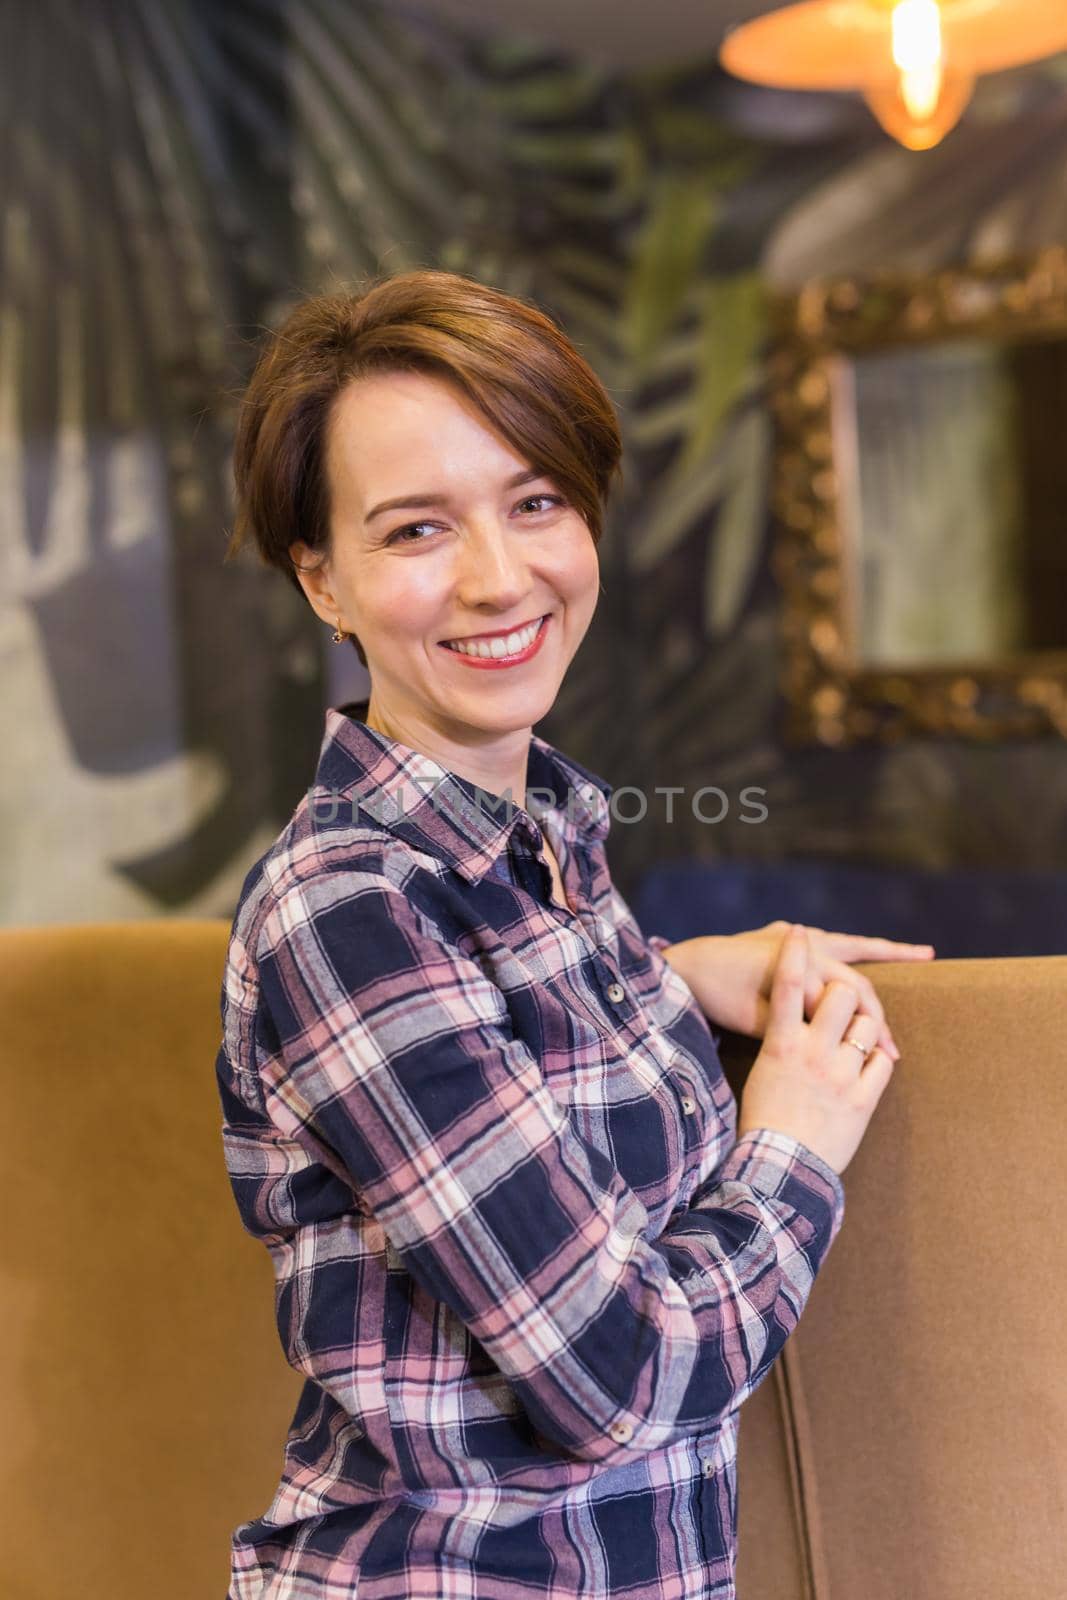 Portrait of confident woman smiling in cafe.